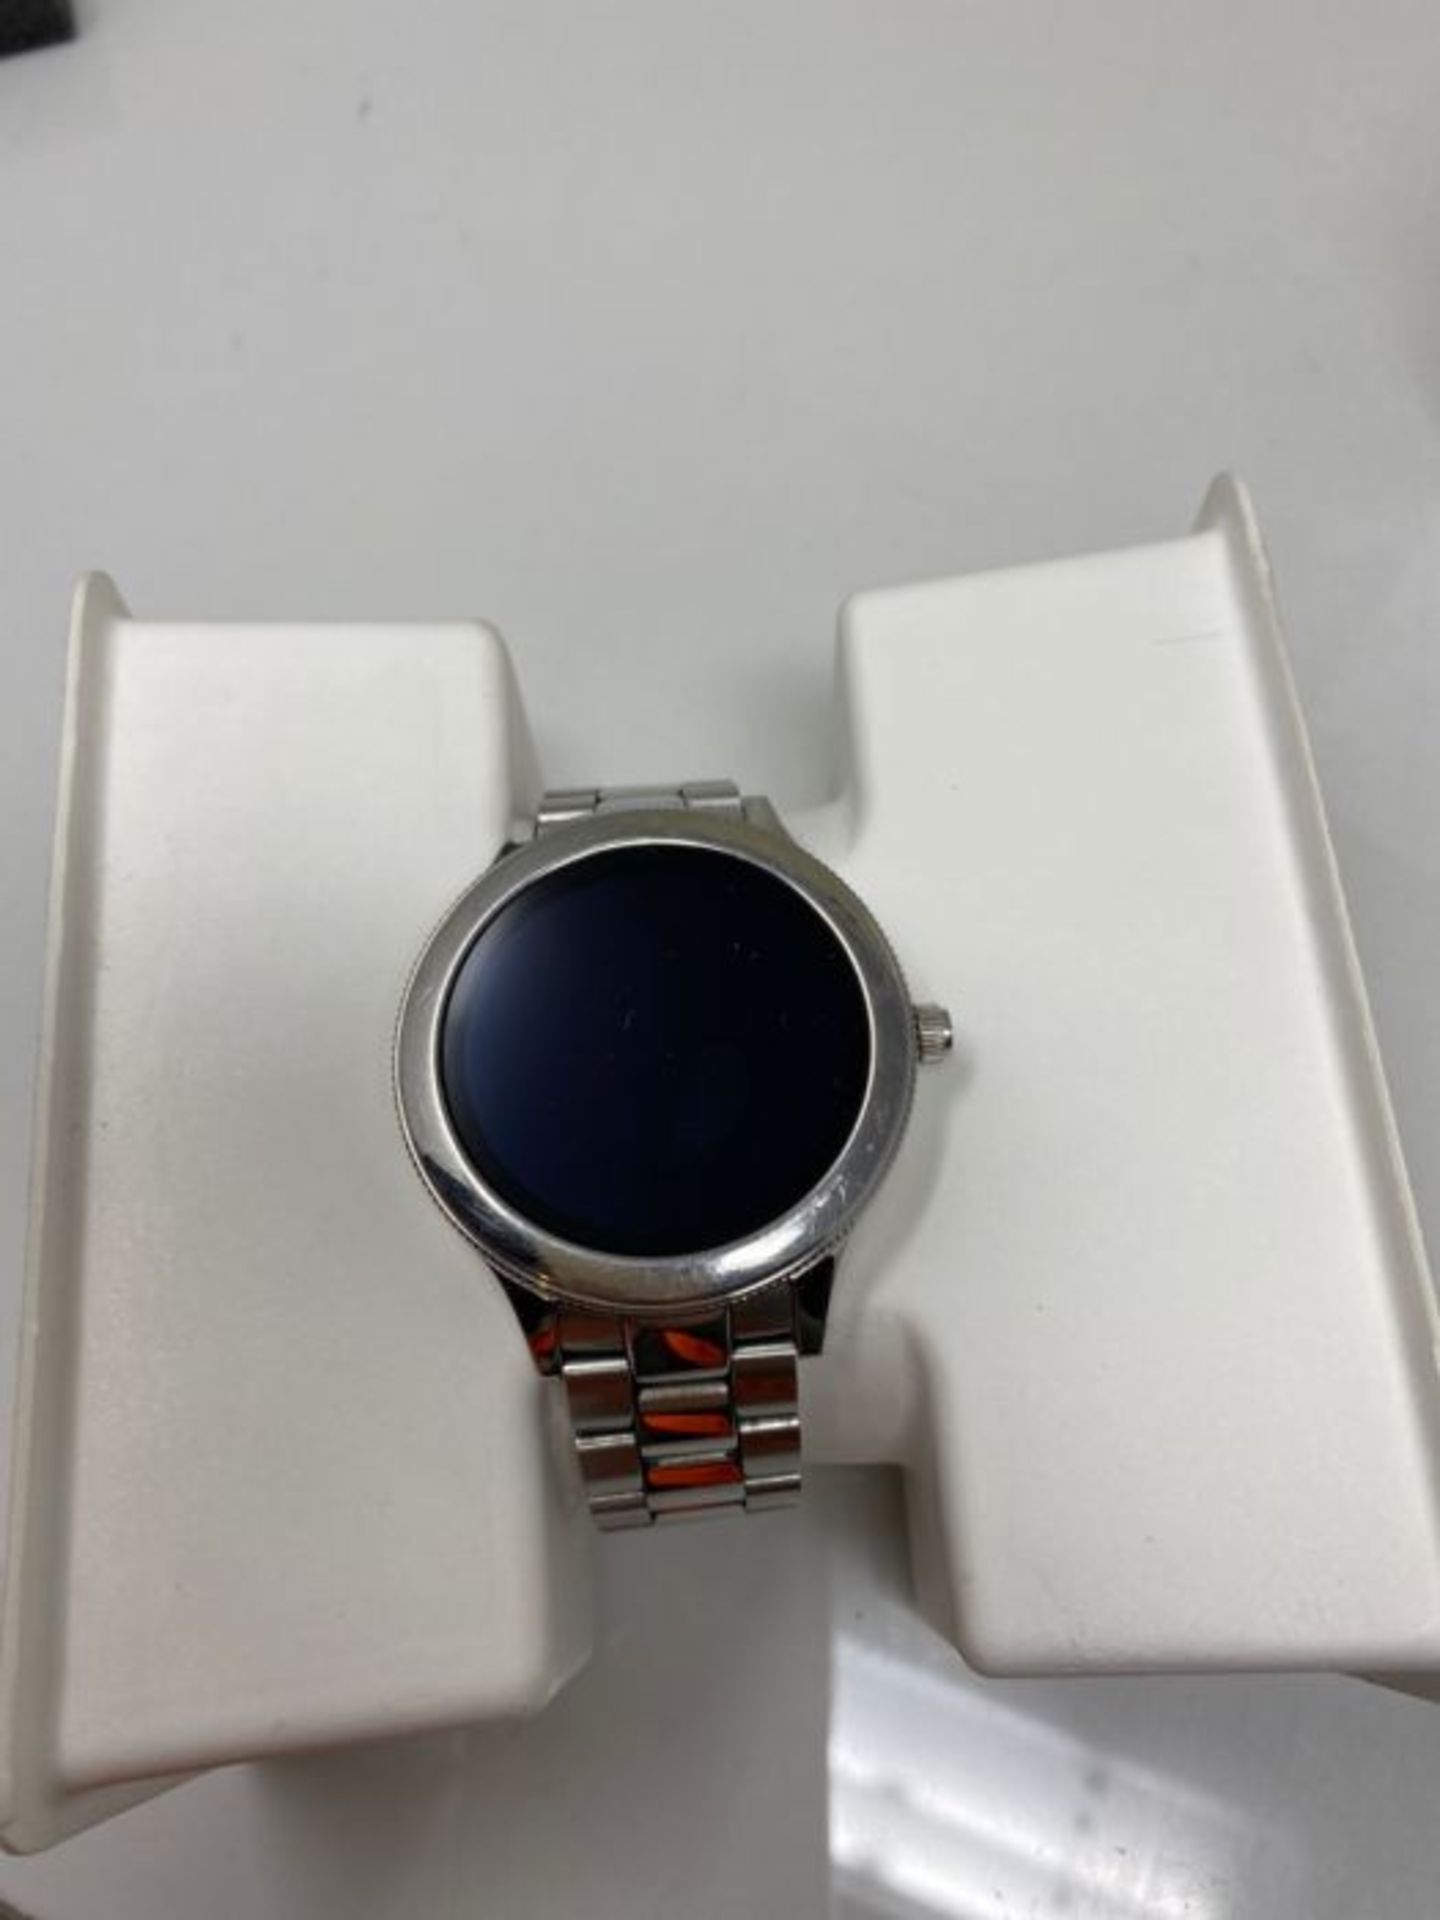 RRP £248.00 Fossil Women's Digital Connected Wrist Watch with Stainless Steel Strap FTW6003 - Image 3 of 3